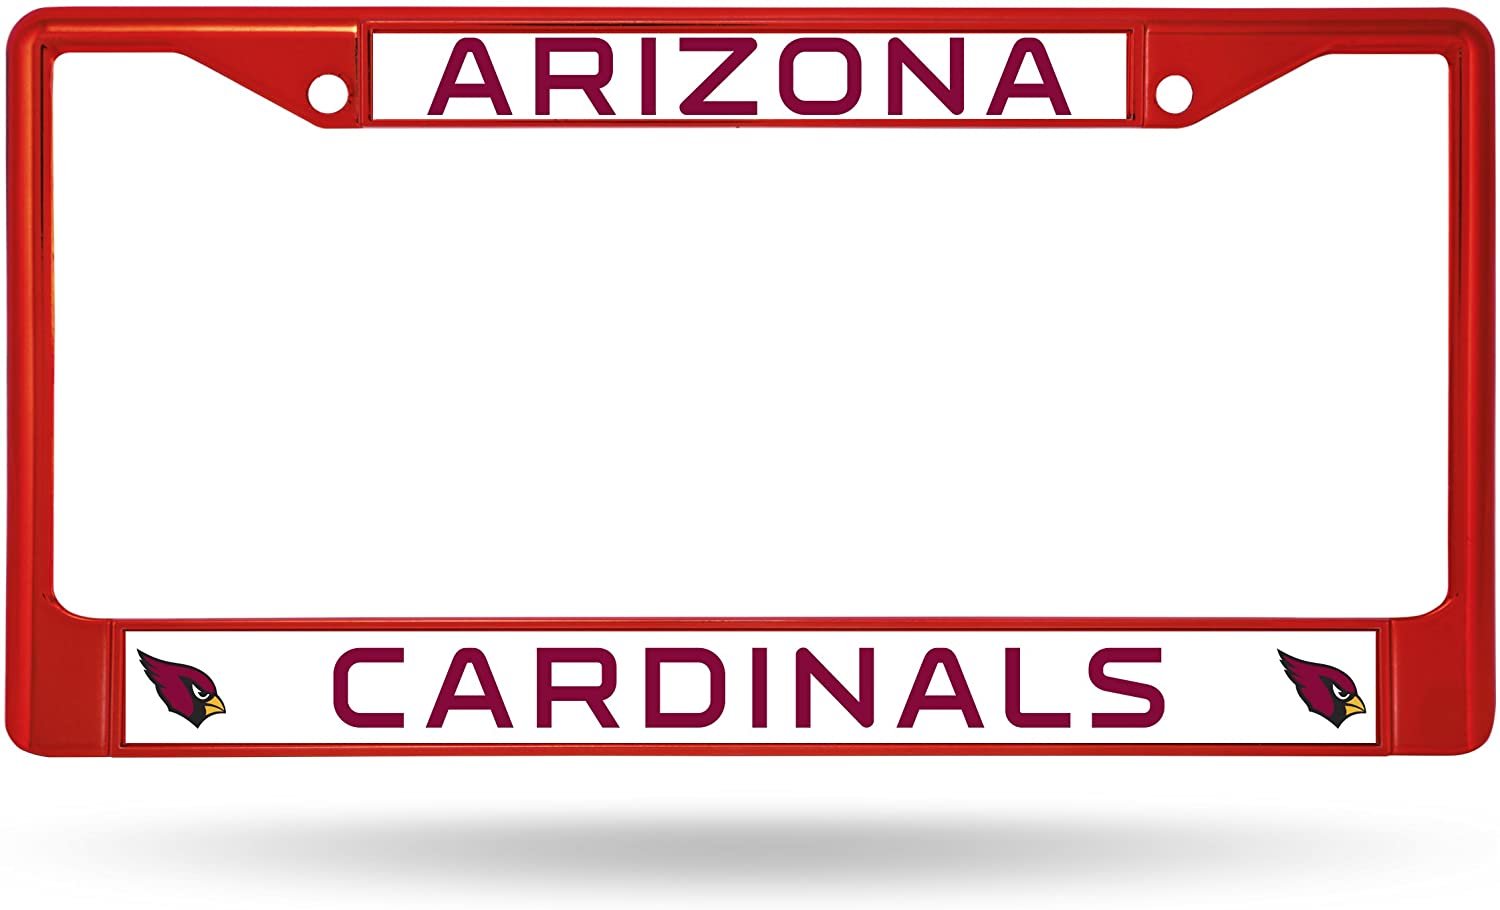 Arizona Cardinals Premium Red Metal License Plate Frame Tag Cover, 12x6 Inch